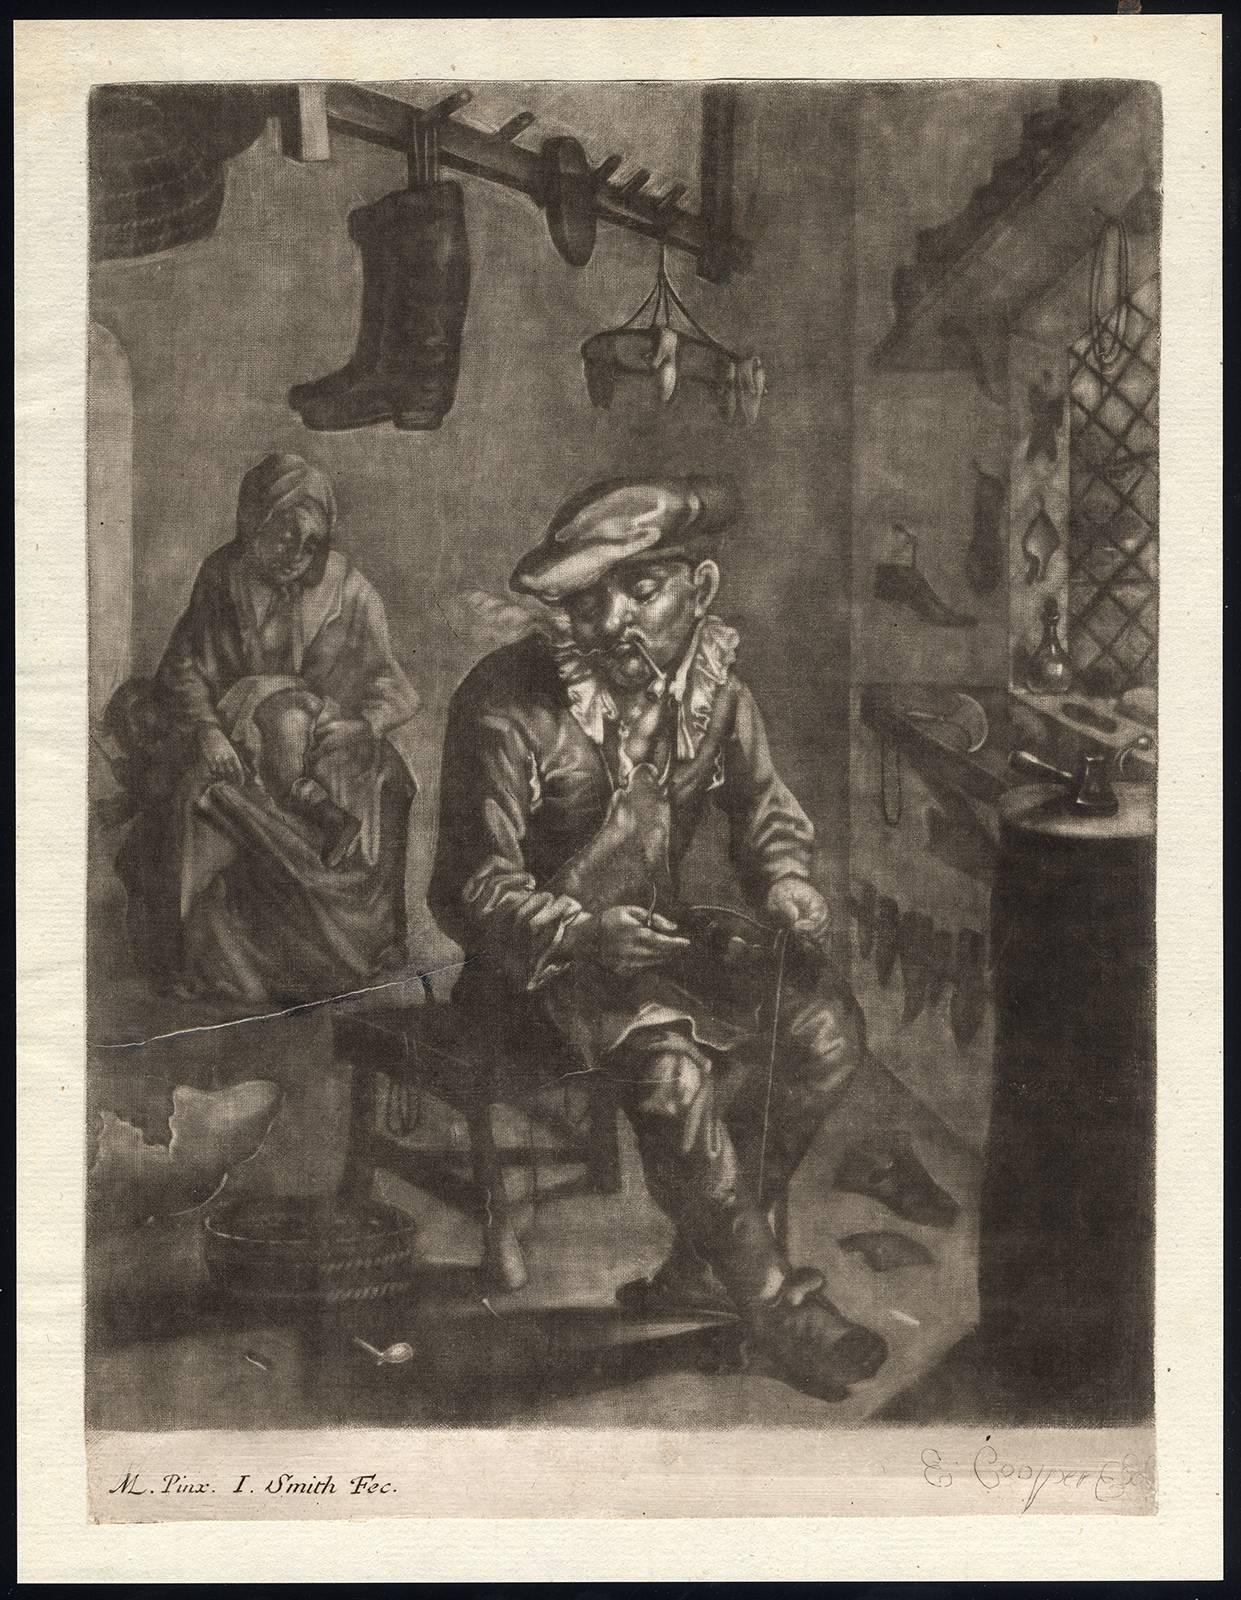 John Smith Figurative Print - Untitled - A shoemaker/cobbler and his wife in their workshop.